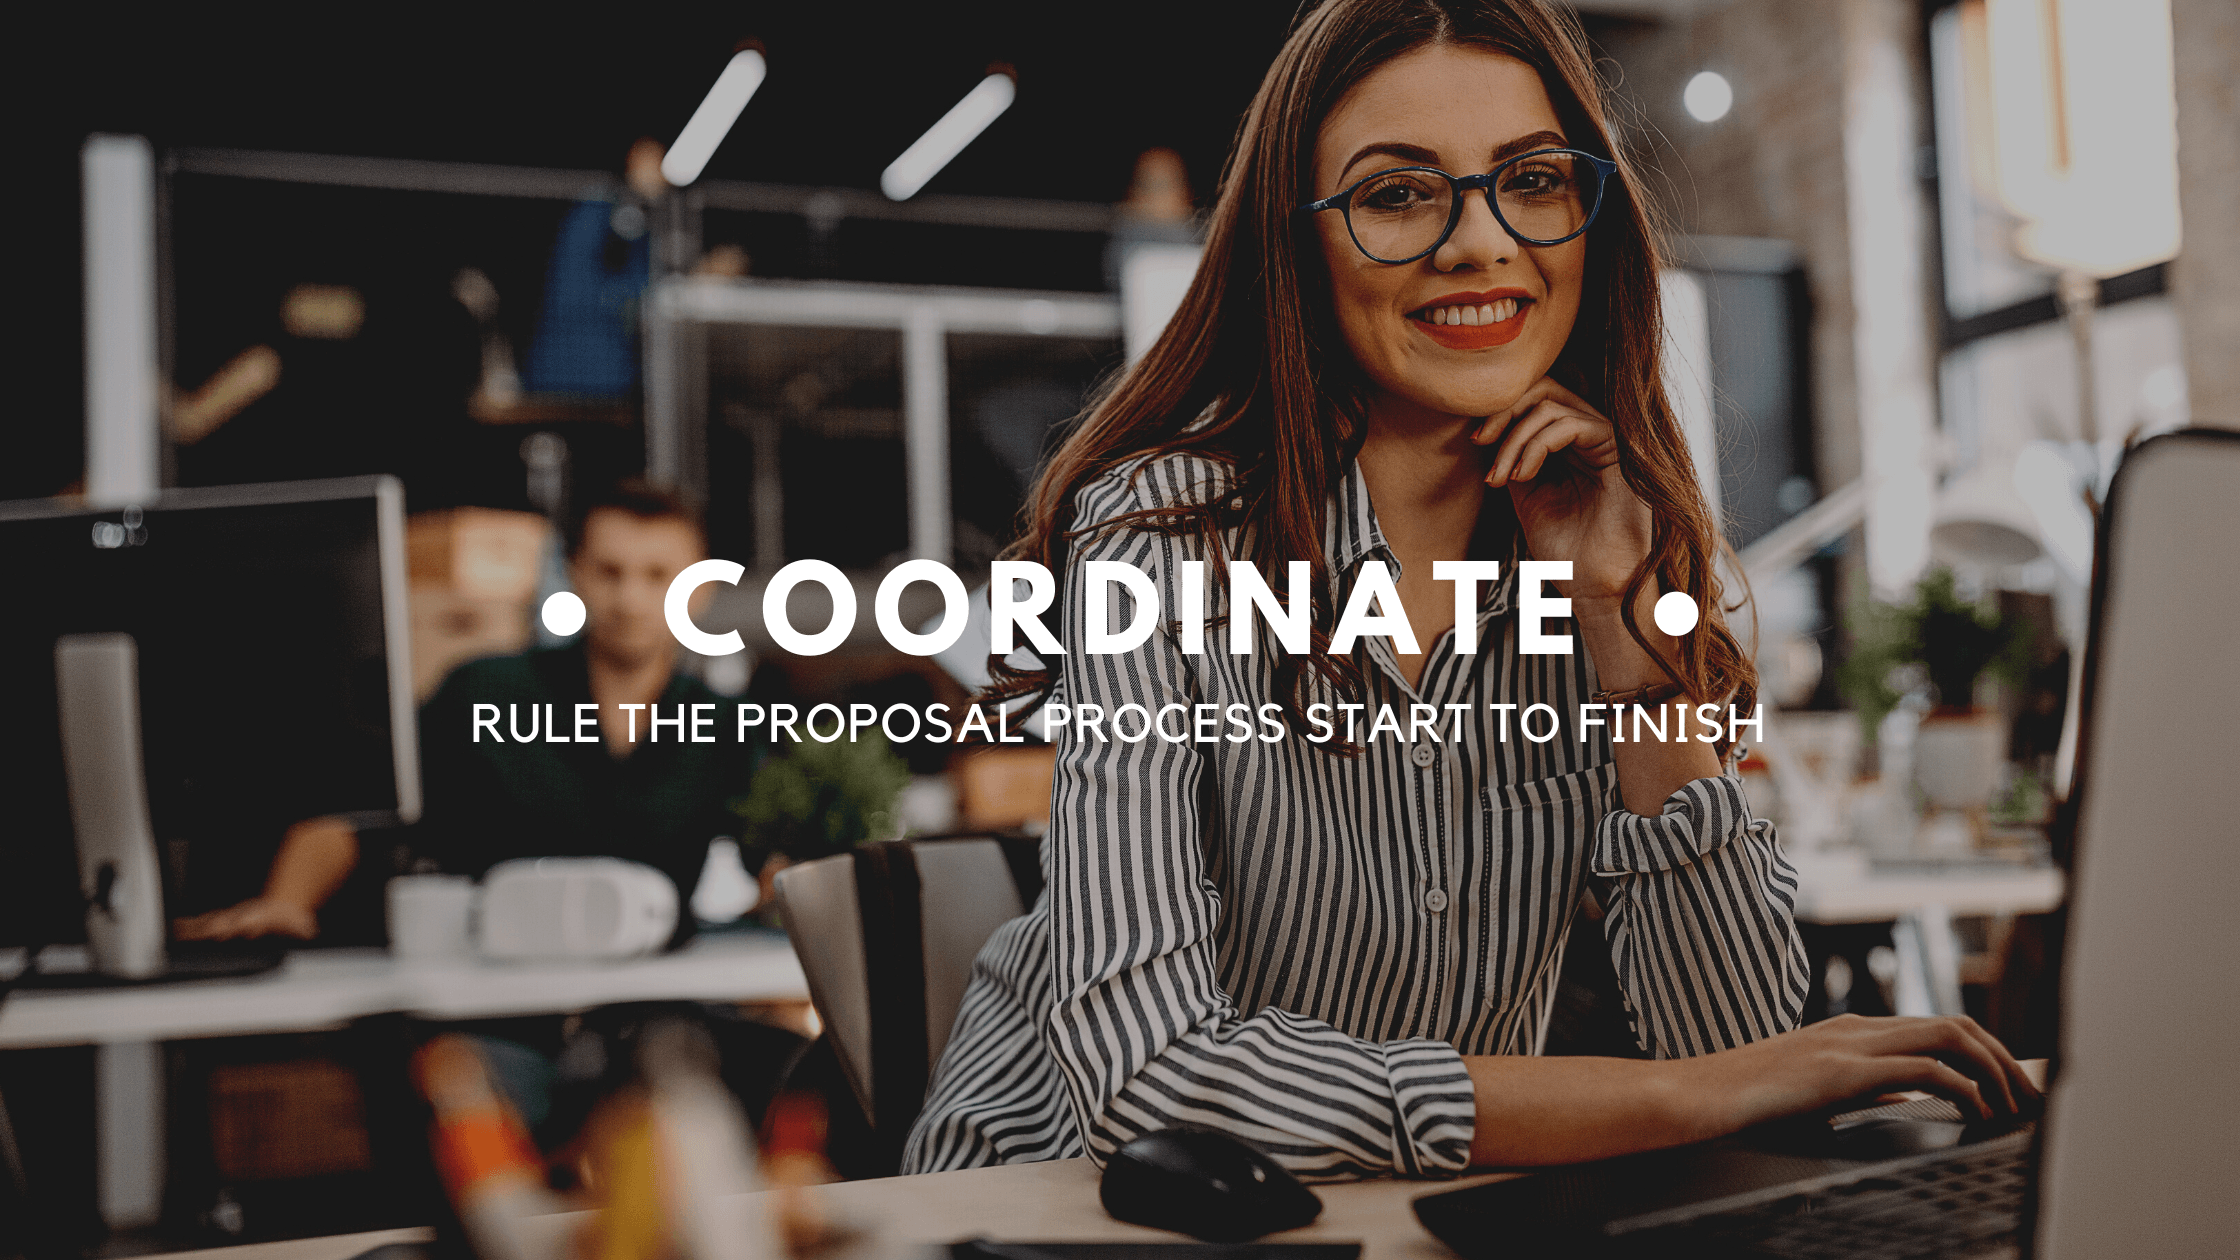 Coordinate the proposal process start to finish